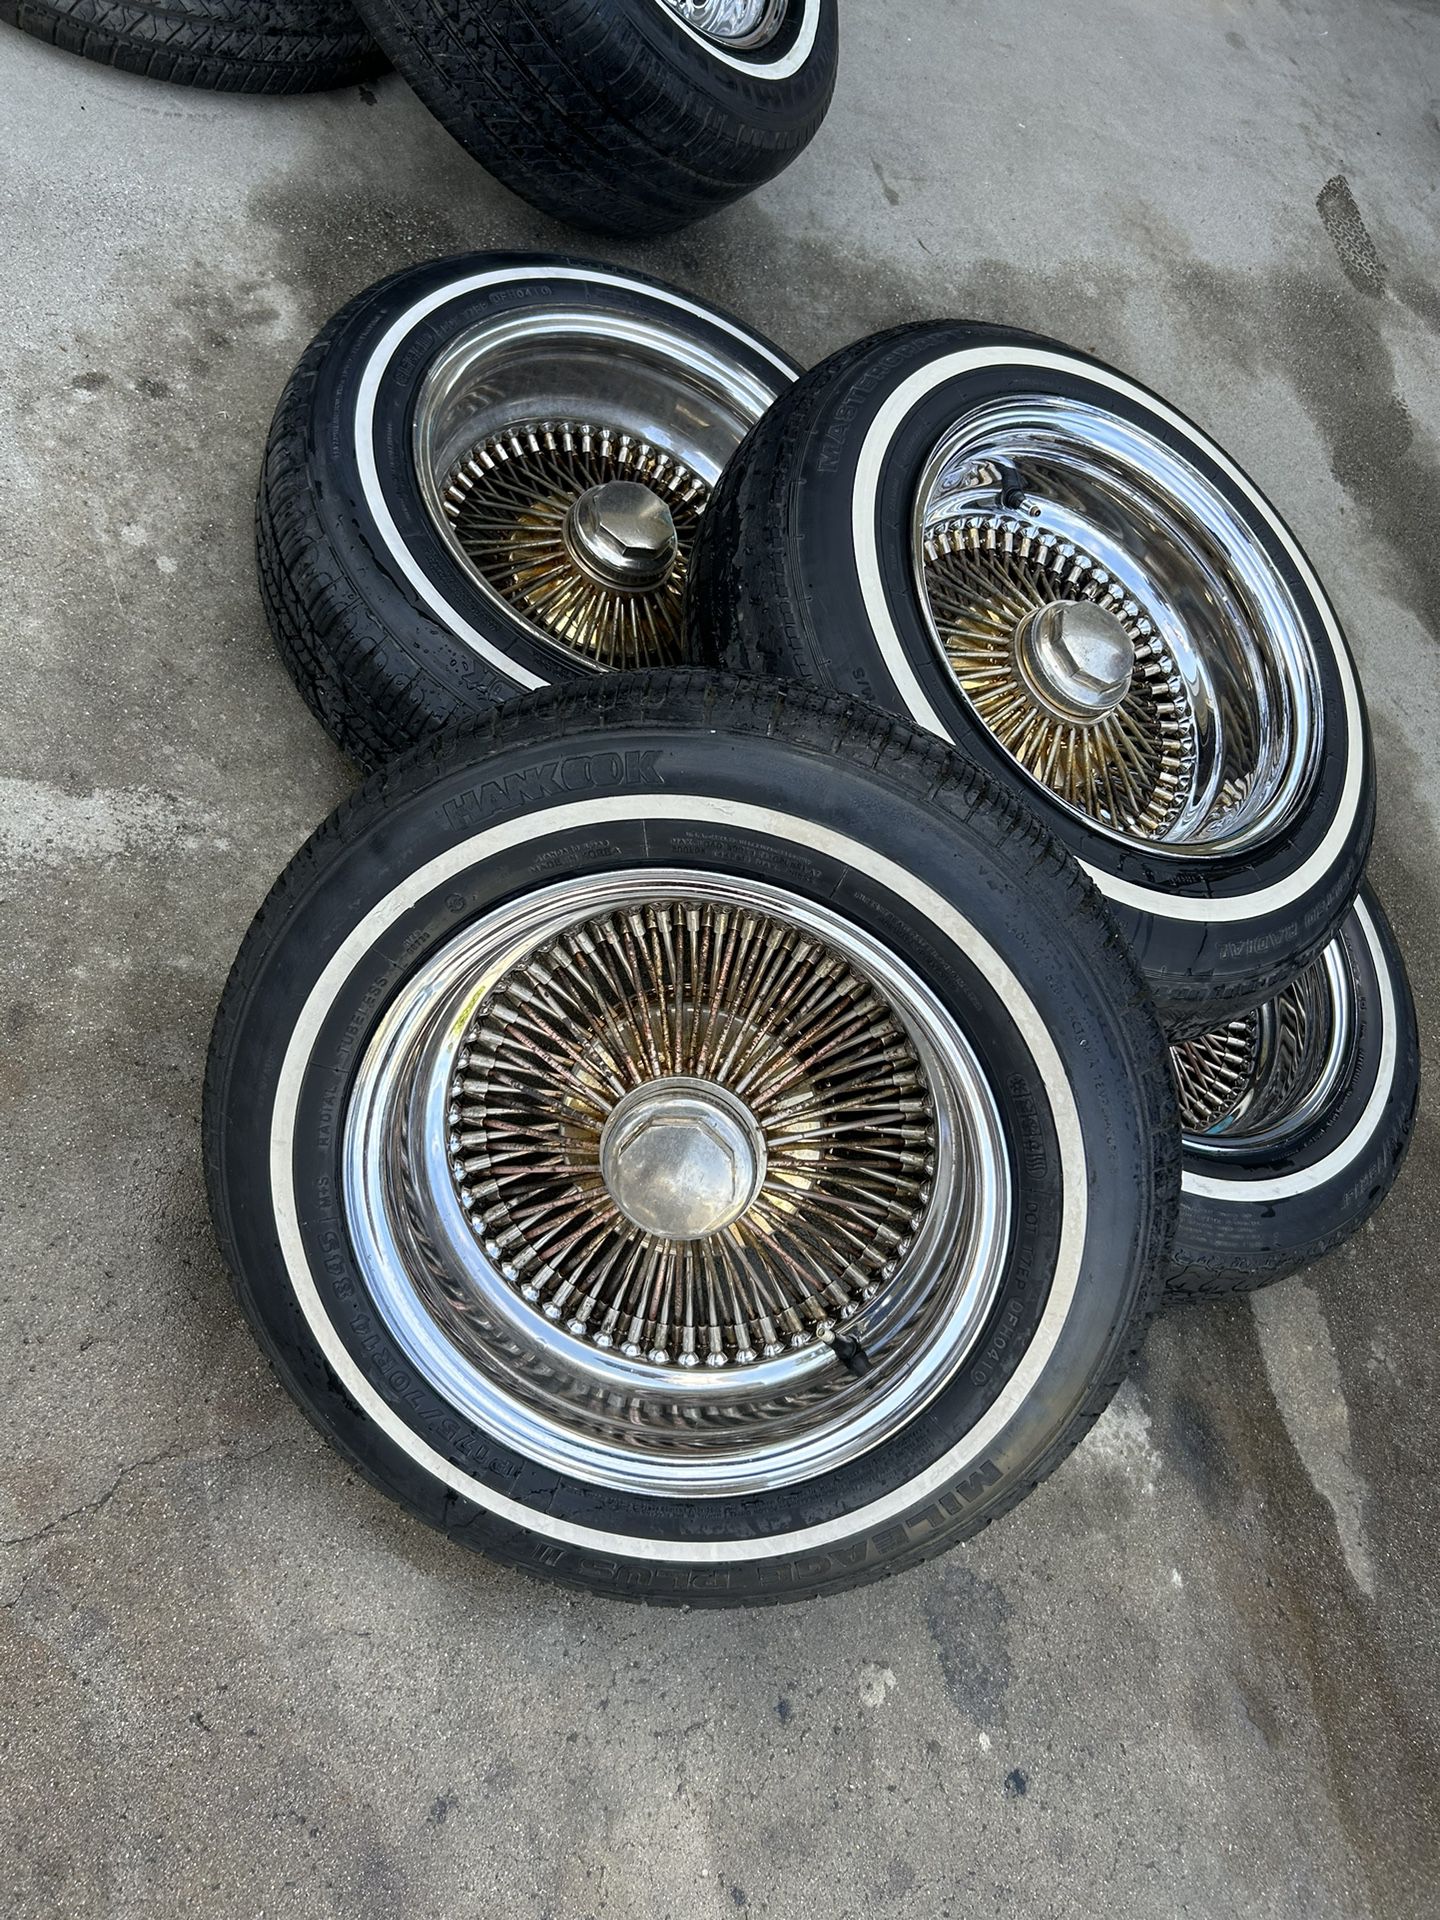 4 WIRE WHEEL TIRES (SERIOUS BUYERS ONLY)